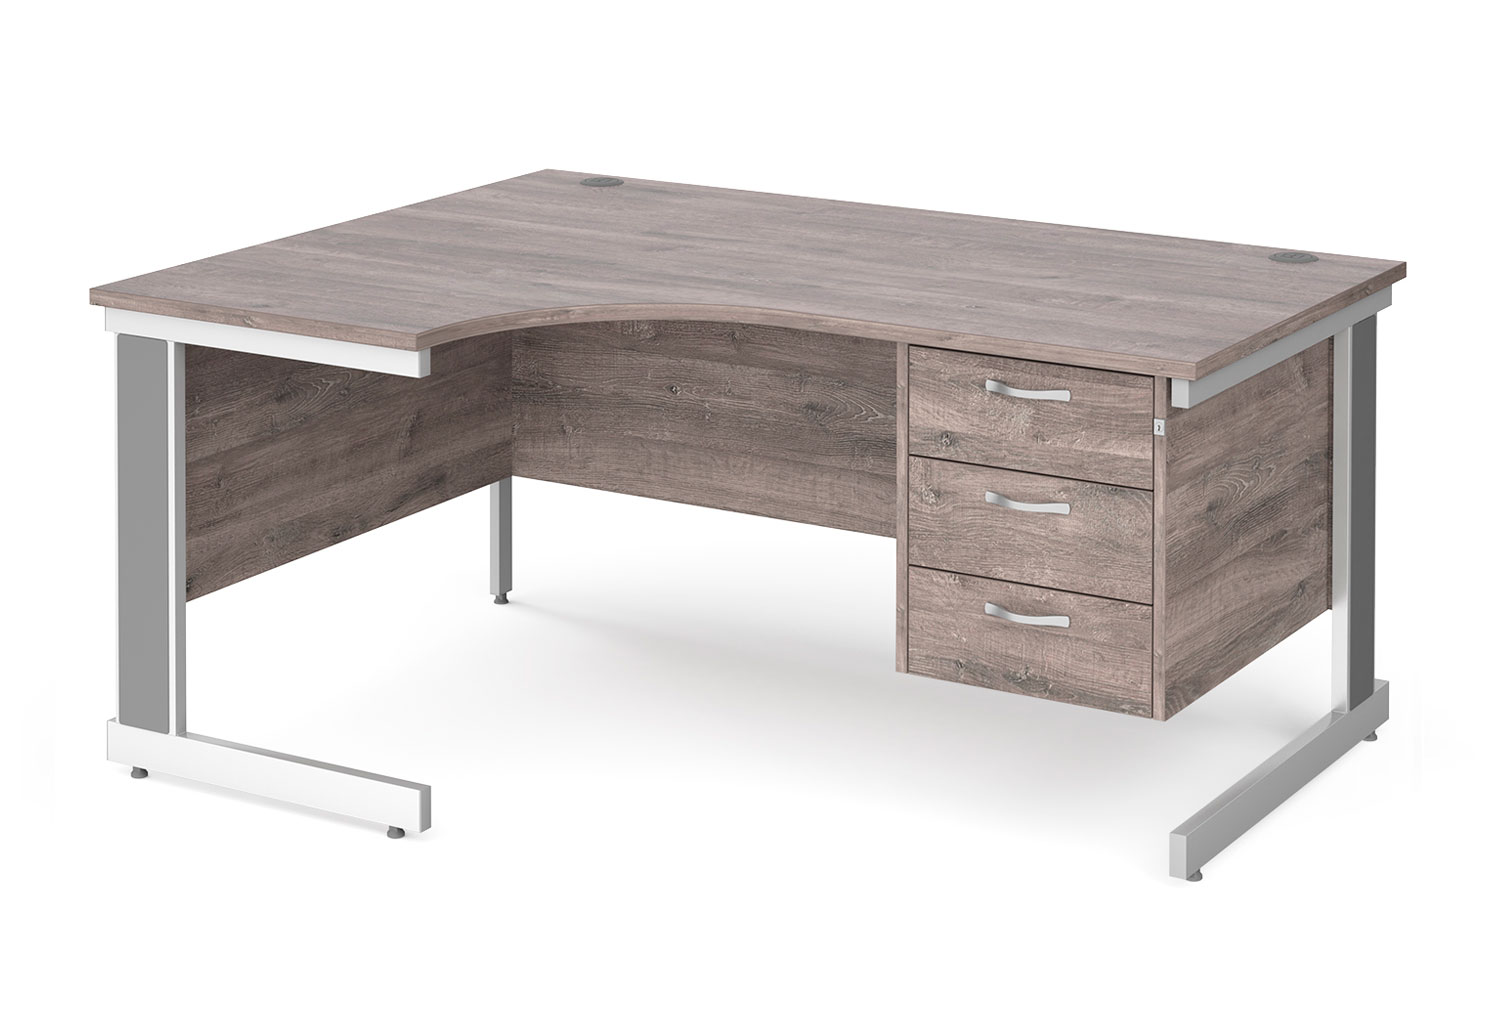 Tully Deluxe Left Hand Ergonomic Office Desk 3 Drawers, 160wx120/80dx73h (cm), Grey Oak, Express Delivery